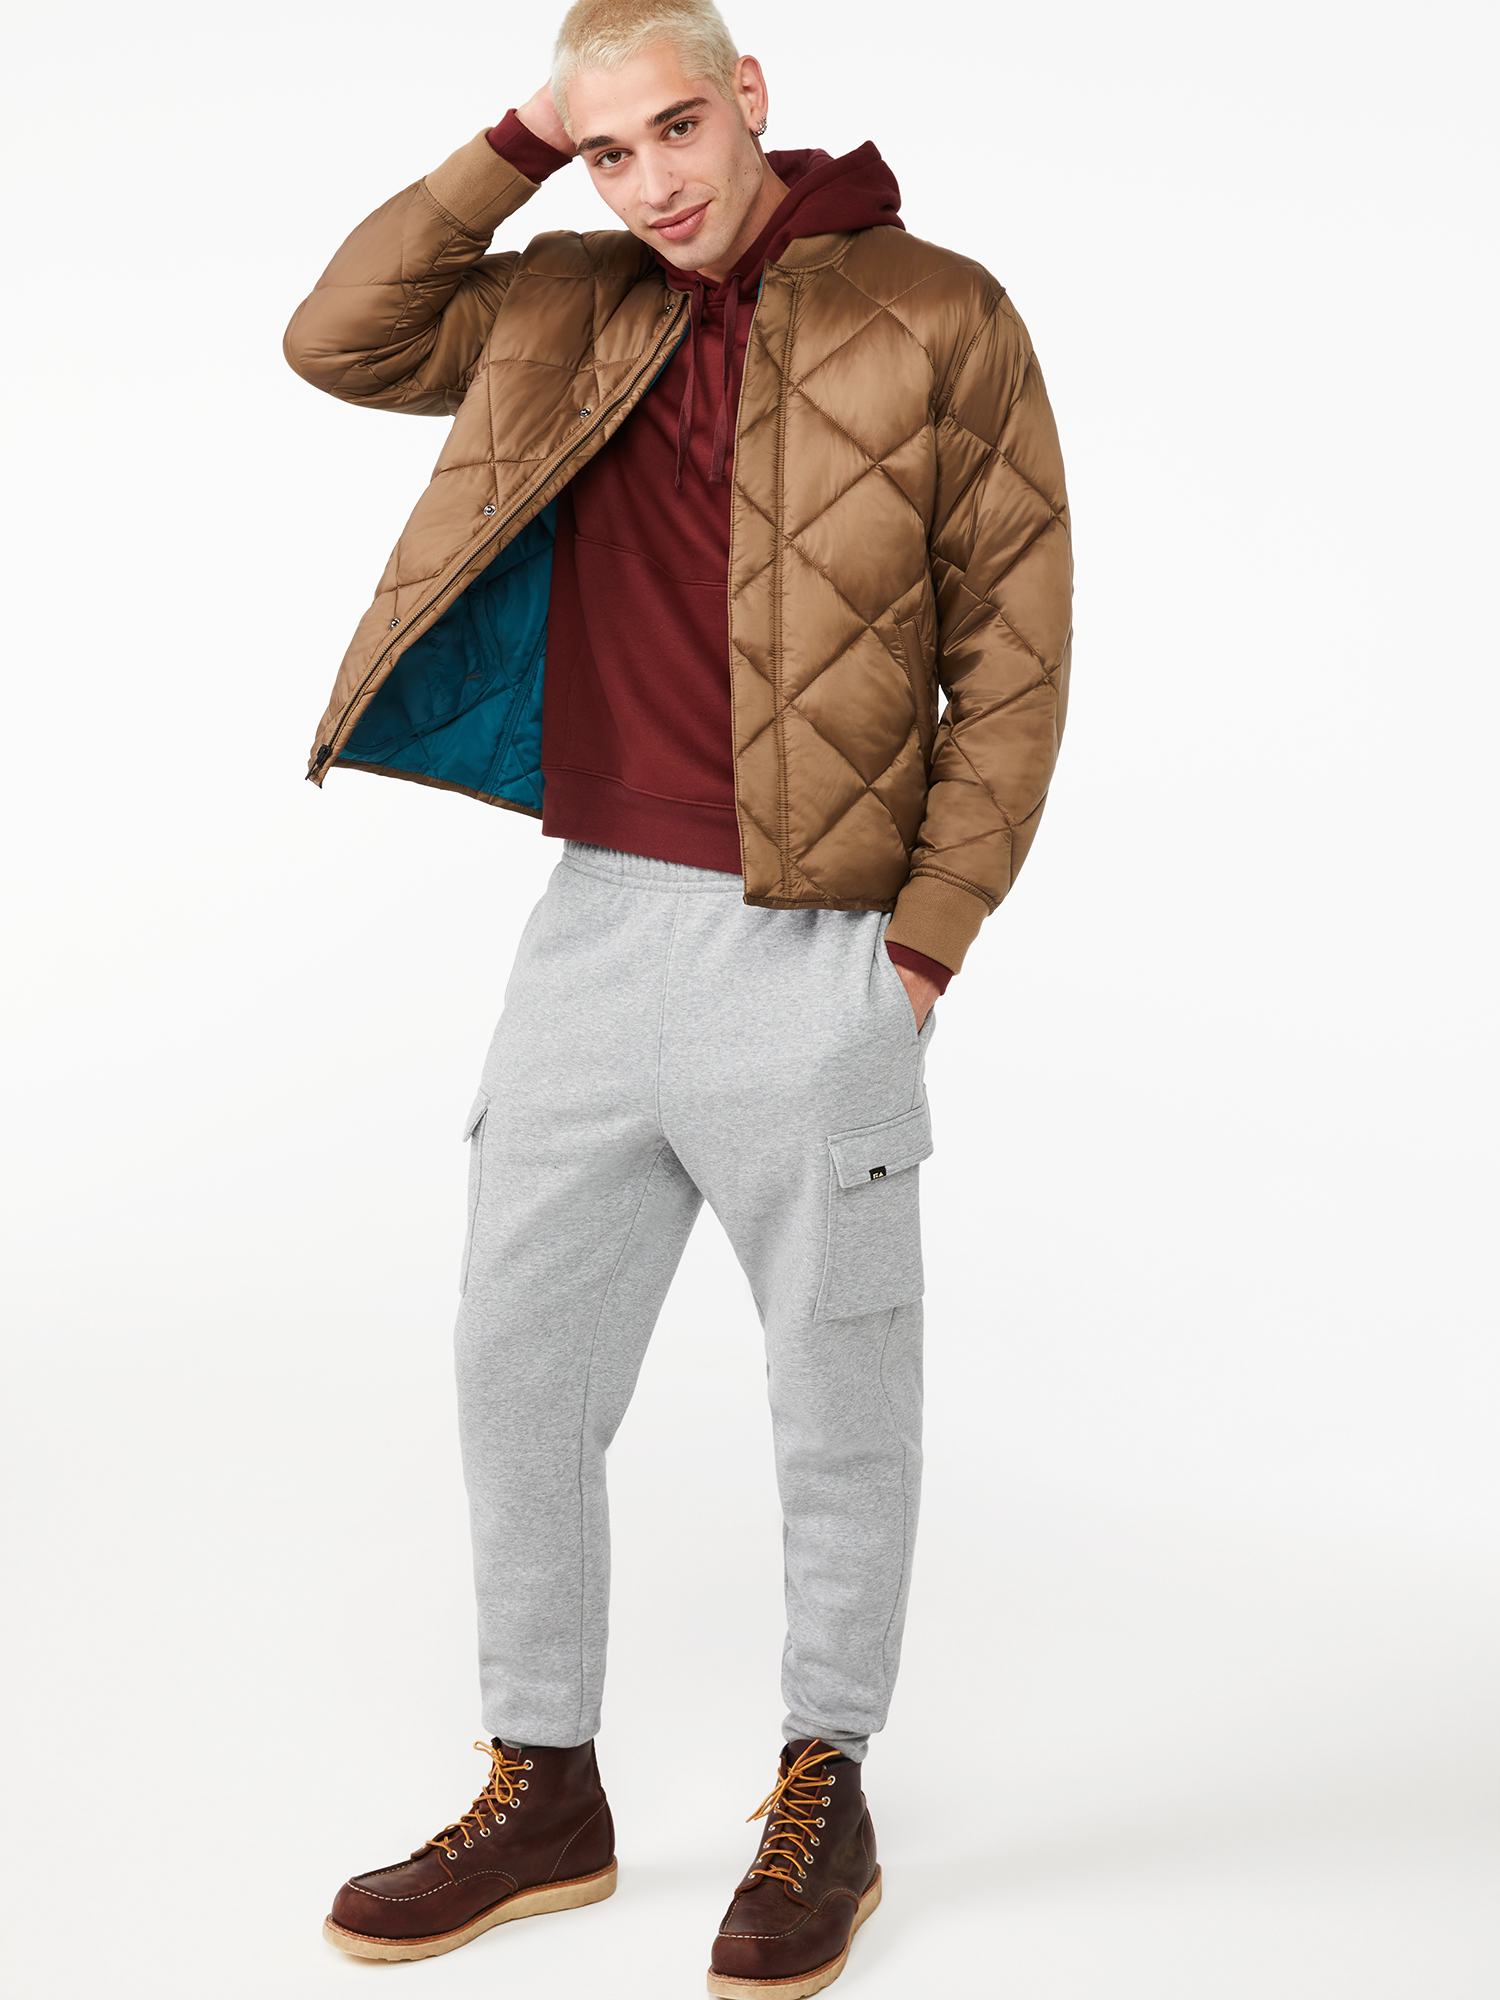 Free Assembly Men's Quilted Bomber Jacket - image 3 of 6